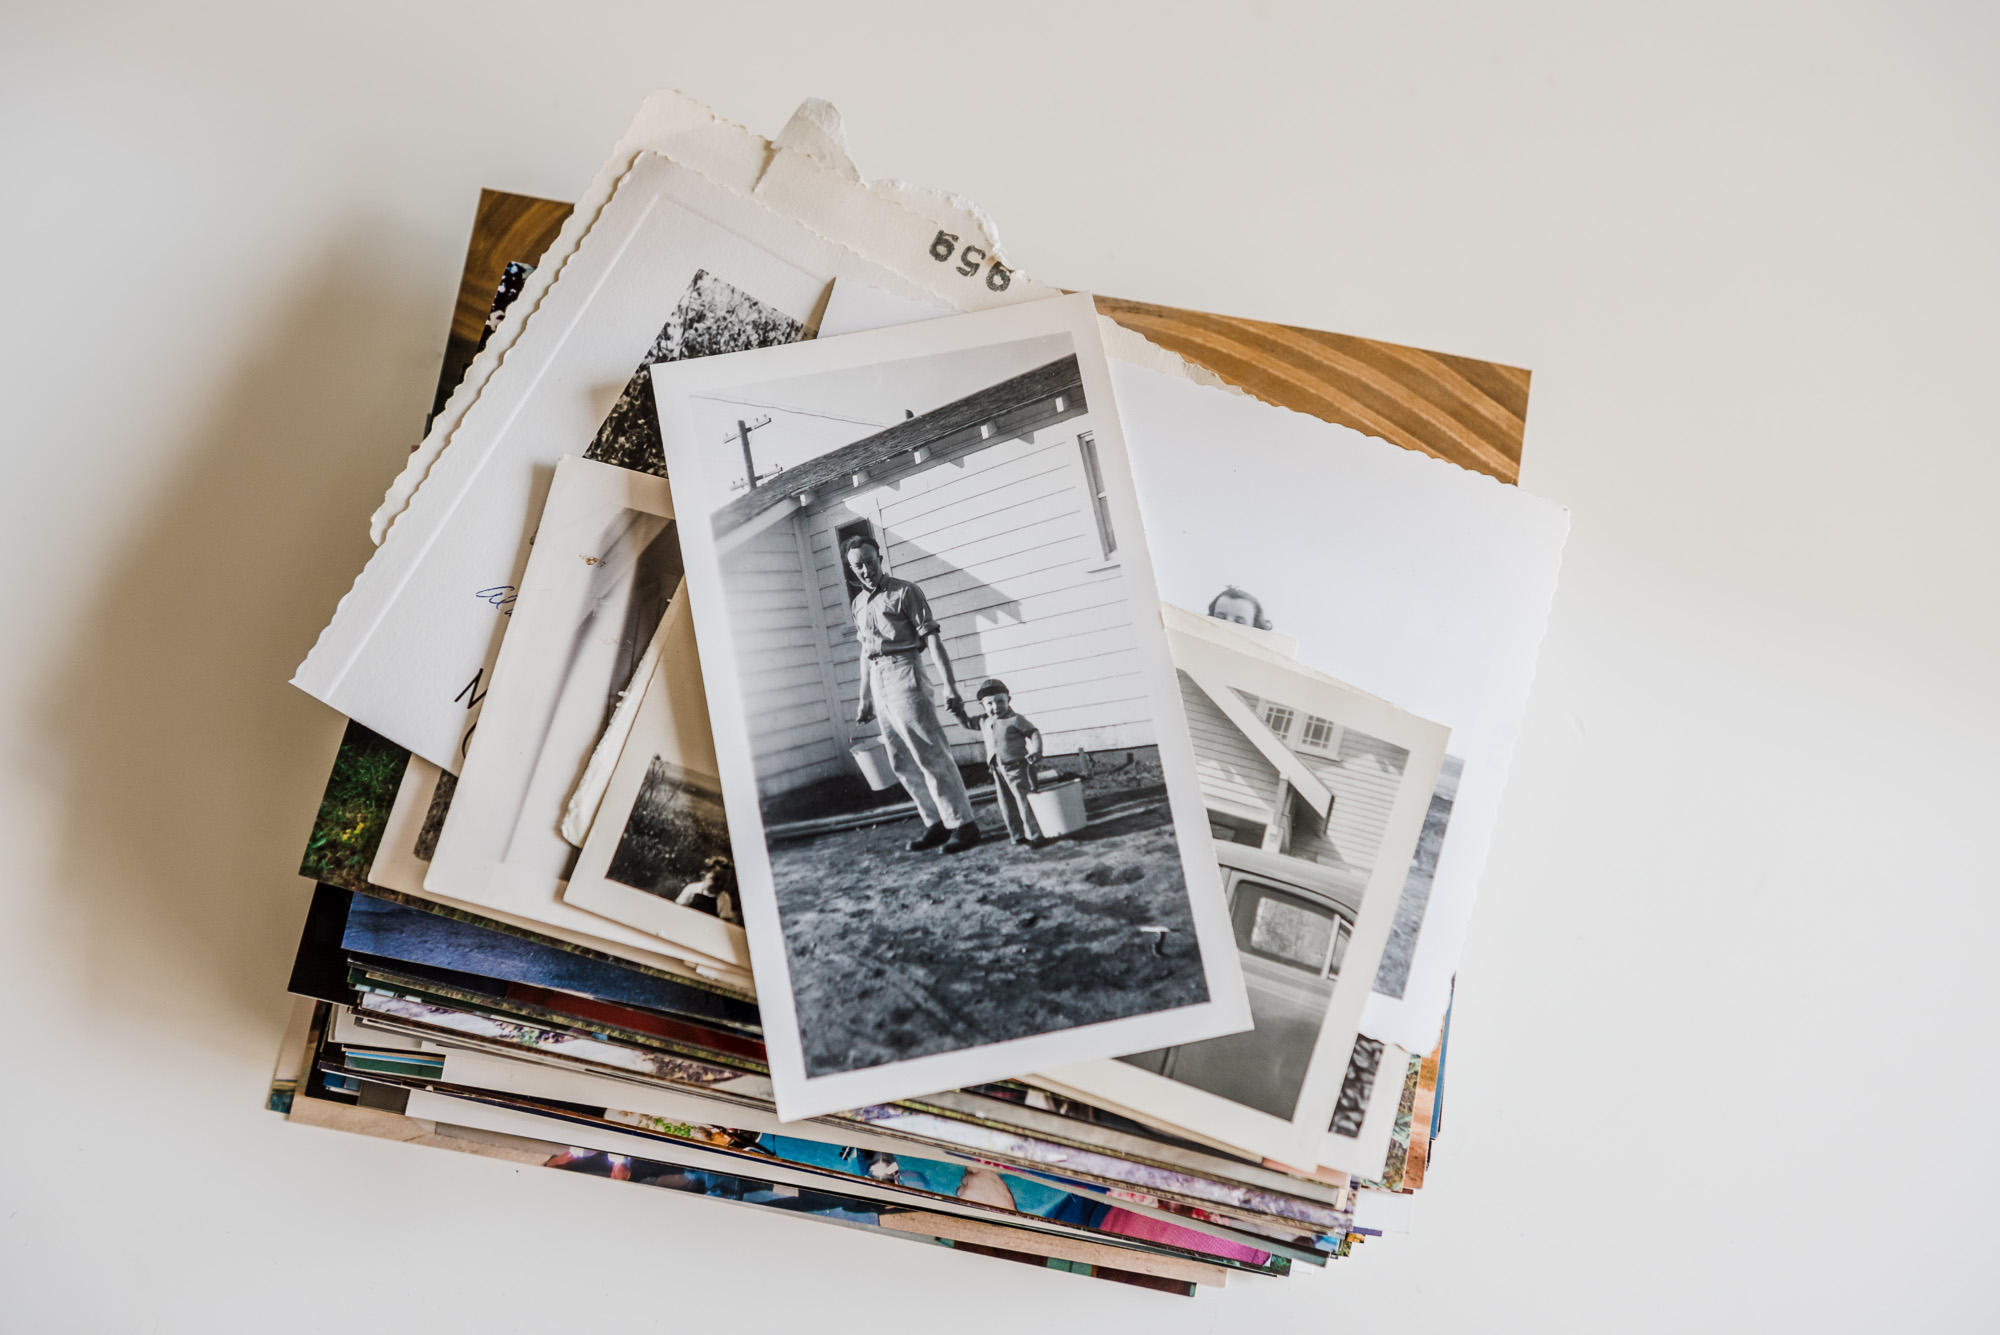 A stack of old photographs. Edmonton Photo Prints